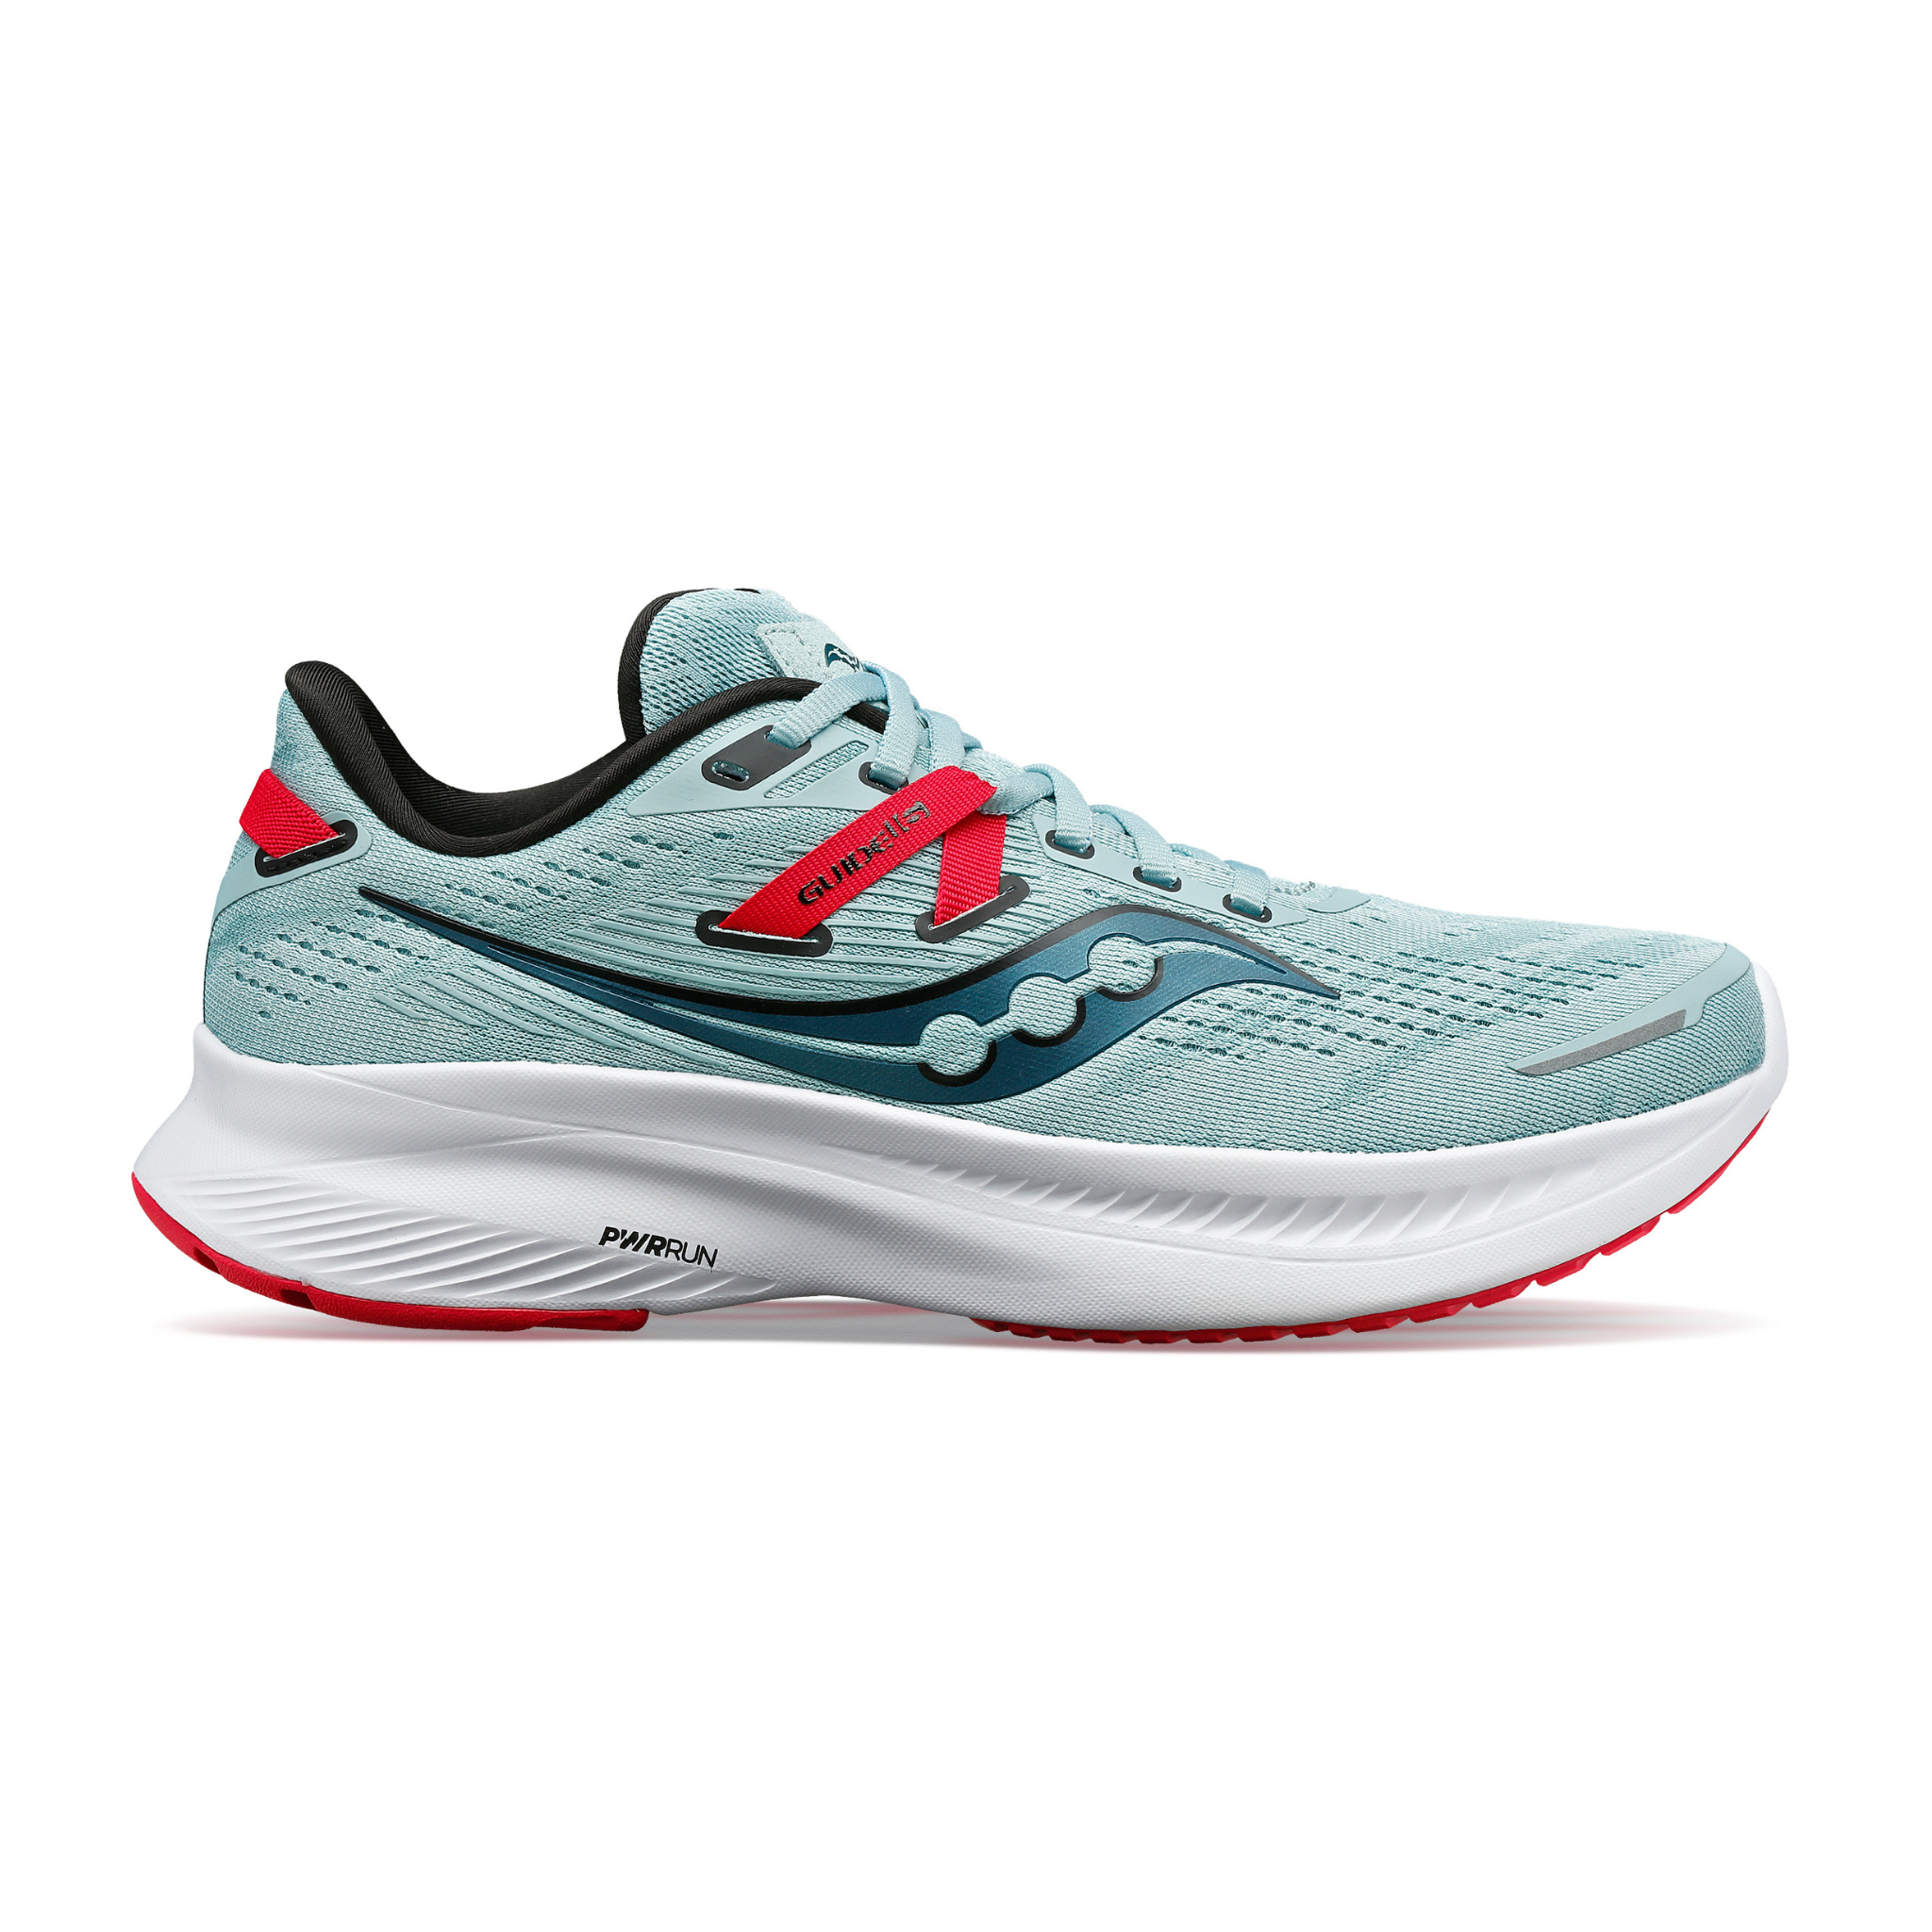 SAUCONY WOMEN'S GUIDE 16 - B - 16 MINERAL/ROSE 5.0